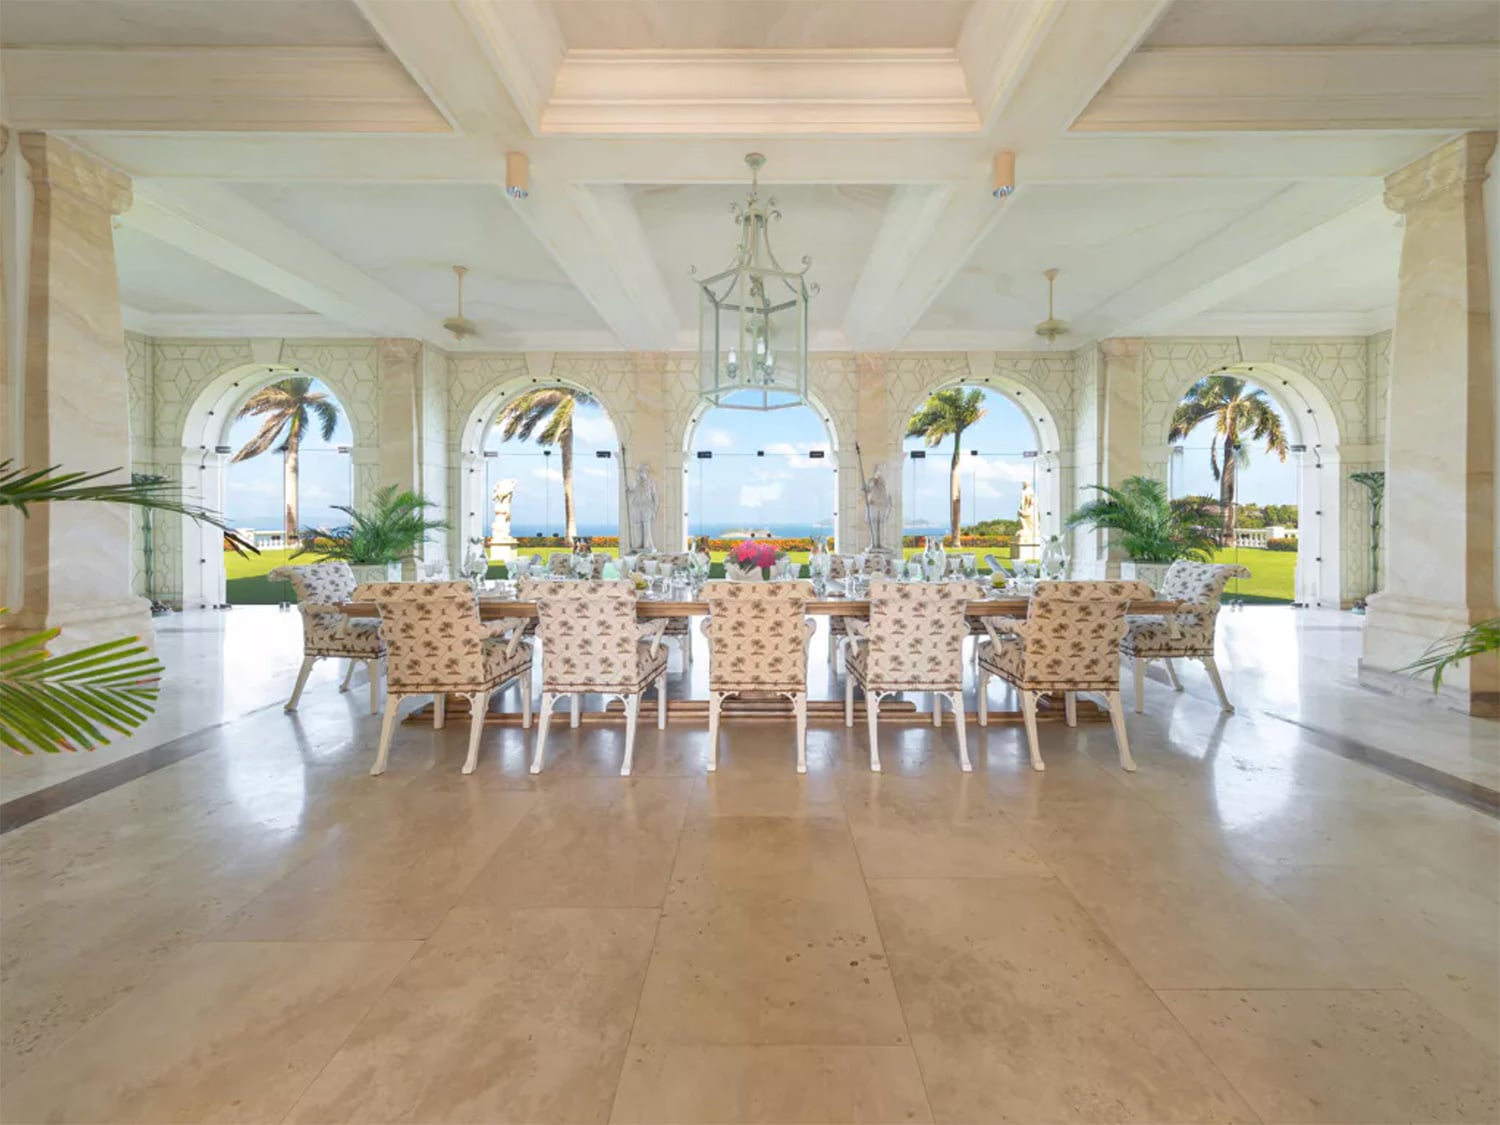 An interior view of the dining space in The Terraces, a $200 million dream home on the Caribbean island of Mustique in St. Vincent and the Grenadines.